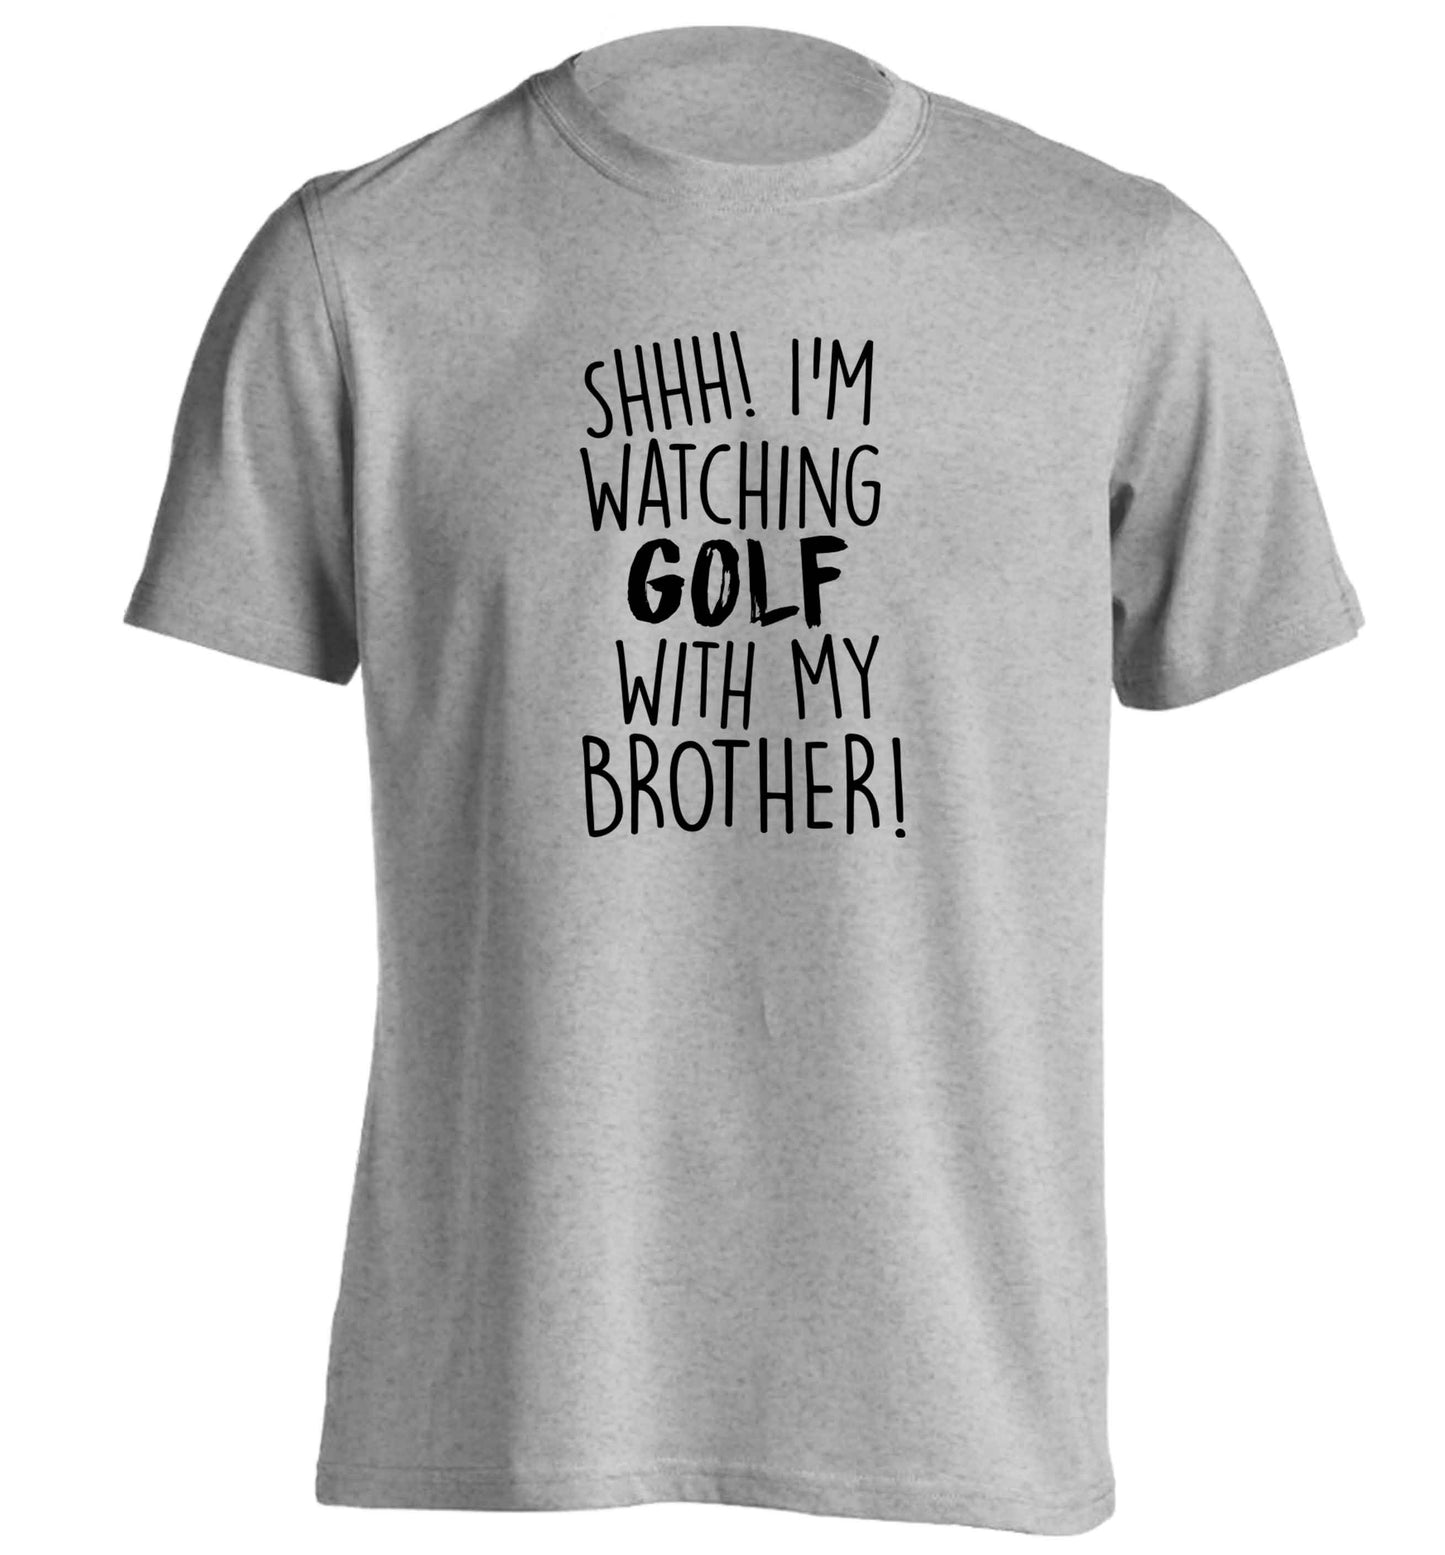 Shh I'm watching golf with my brother adults unisex grey Tshirt 2XL